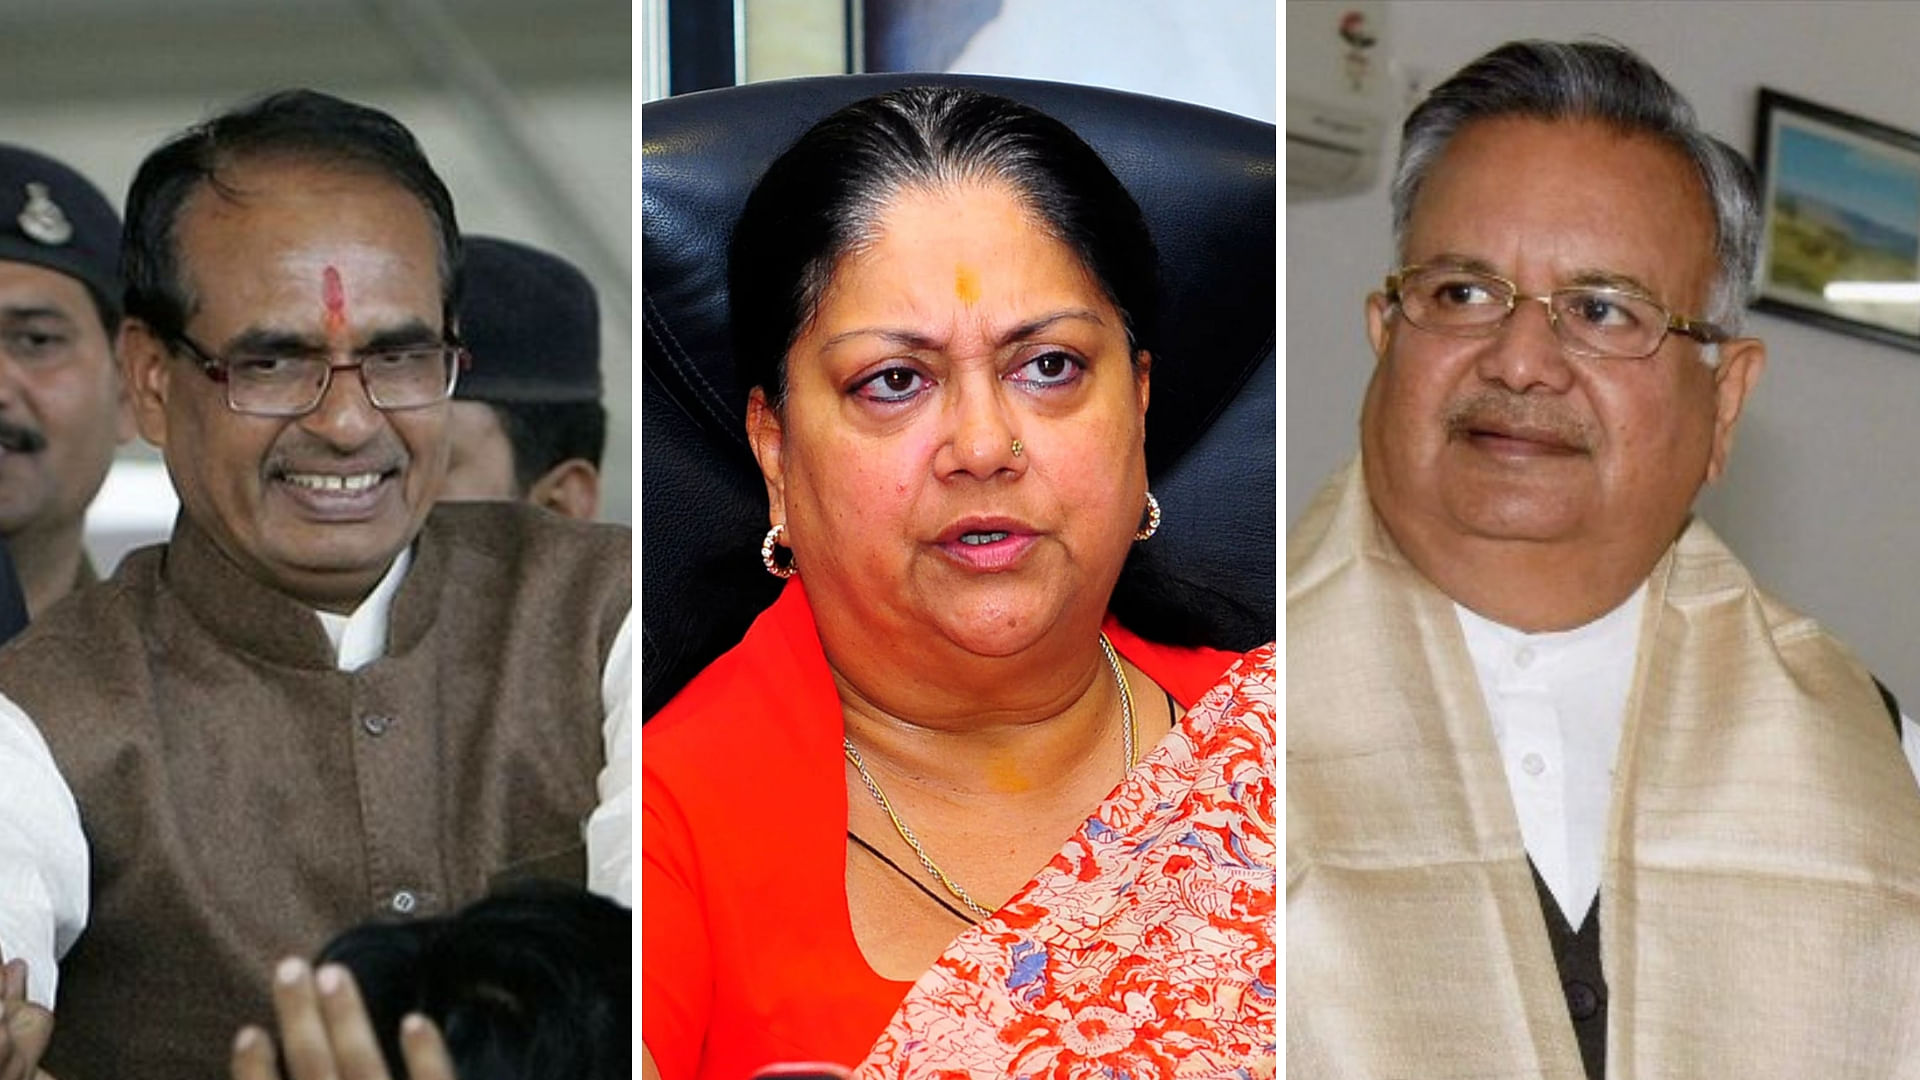 Current Chief Ministers of Madhya Pradesh, Rajasthan, and Chhattisgarh, Shivraj Chouhan (left), Vasundhara Raje (middle), and Raman Singh (right), respectively.